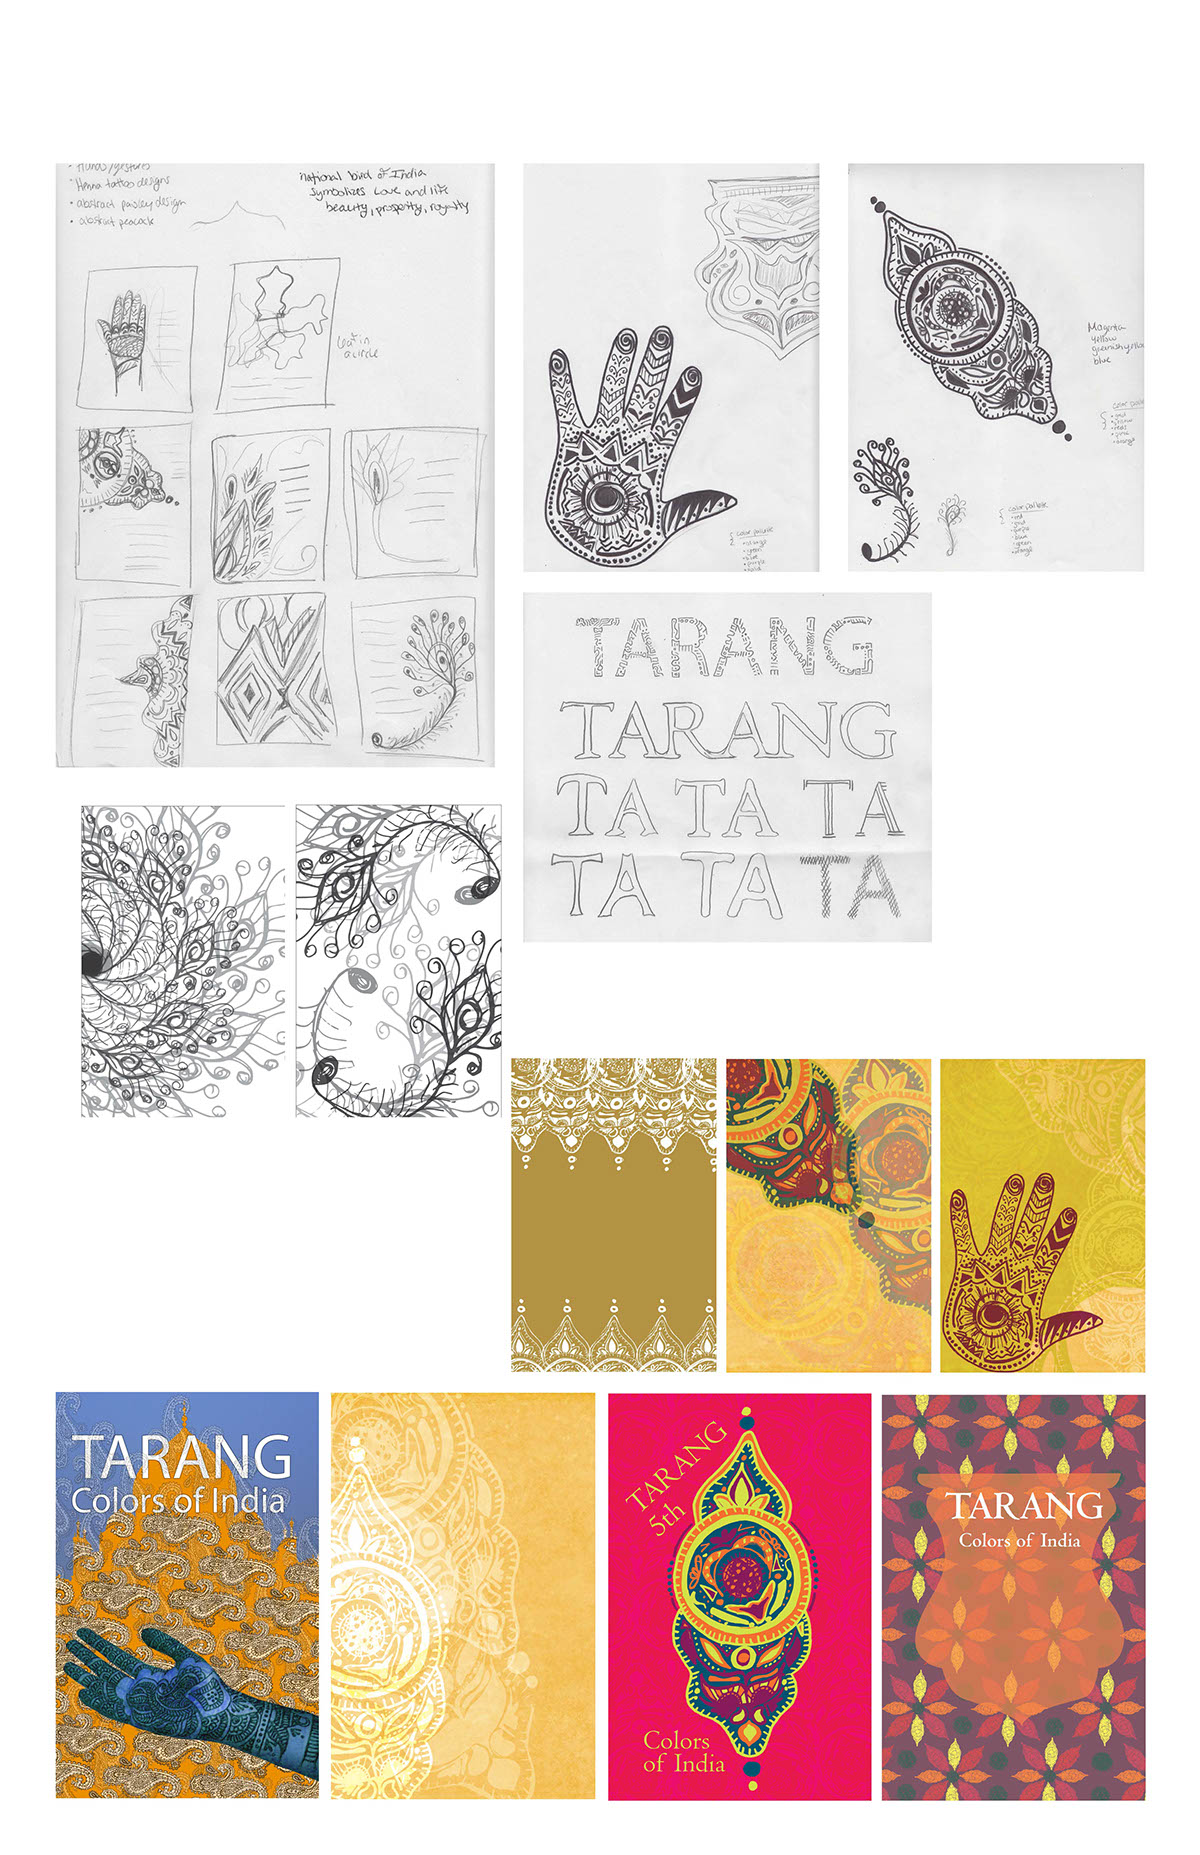 tanarg color handdrawn pattern figures India process sketches